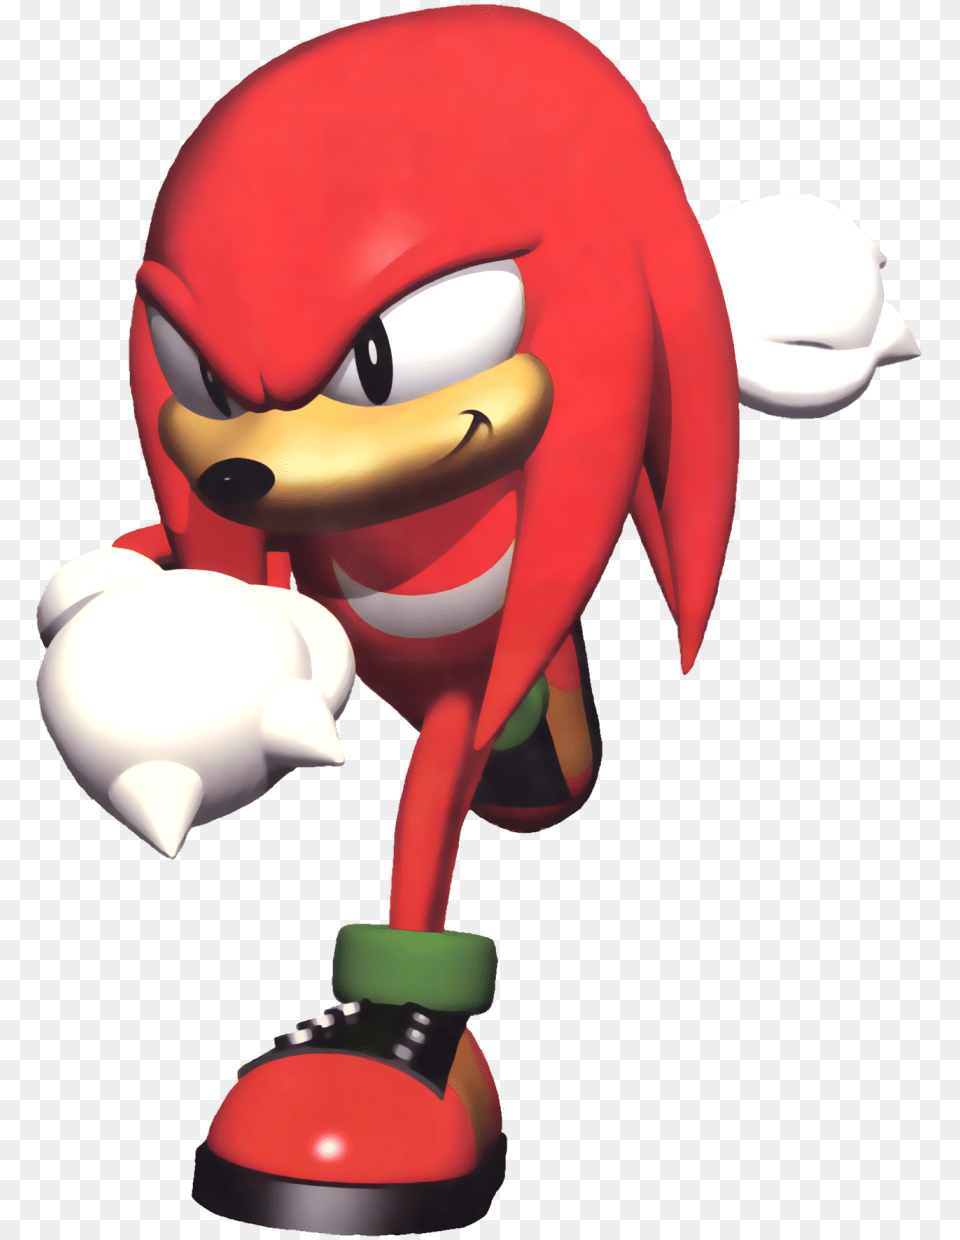 Knuckles The Echidna Conflicting Views, Toy Png